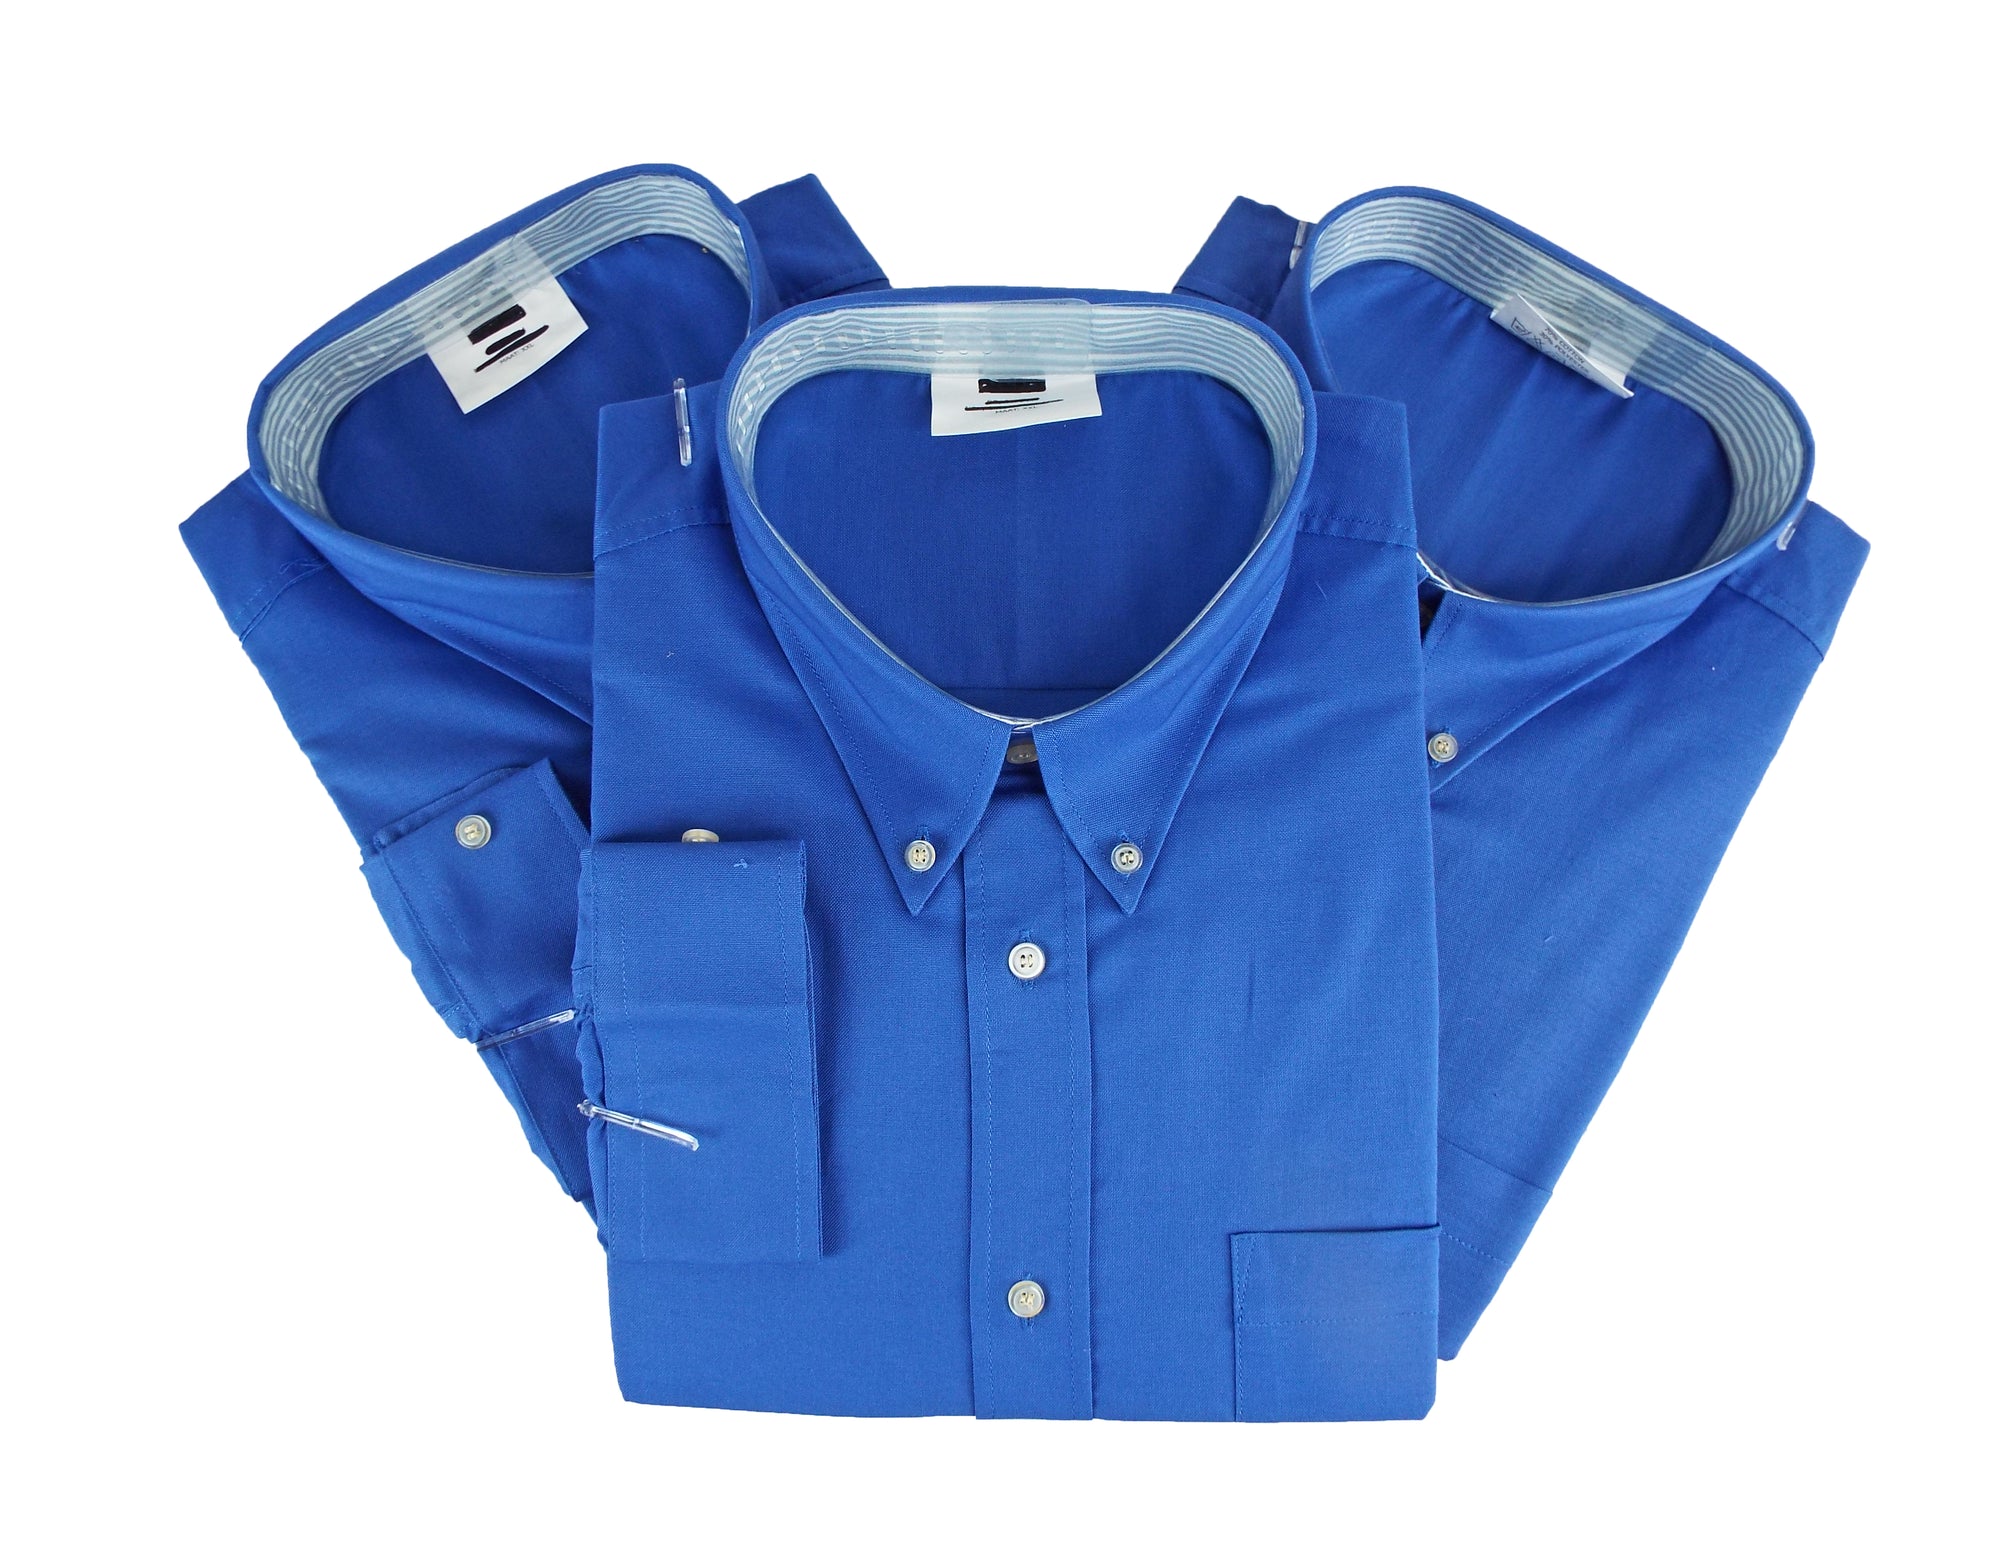 THREE-PACK - Dutch police/security blue Long-sleeved shirt